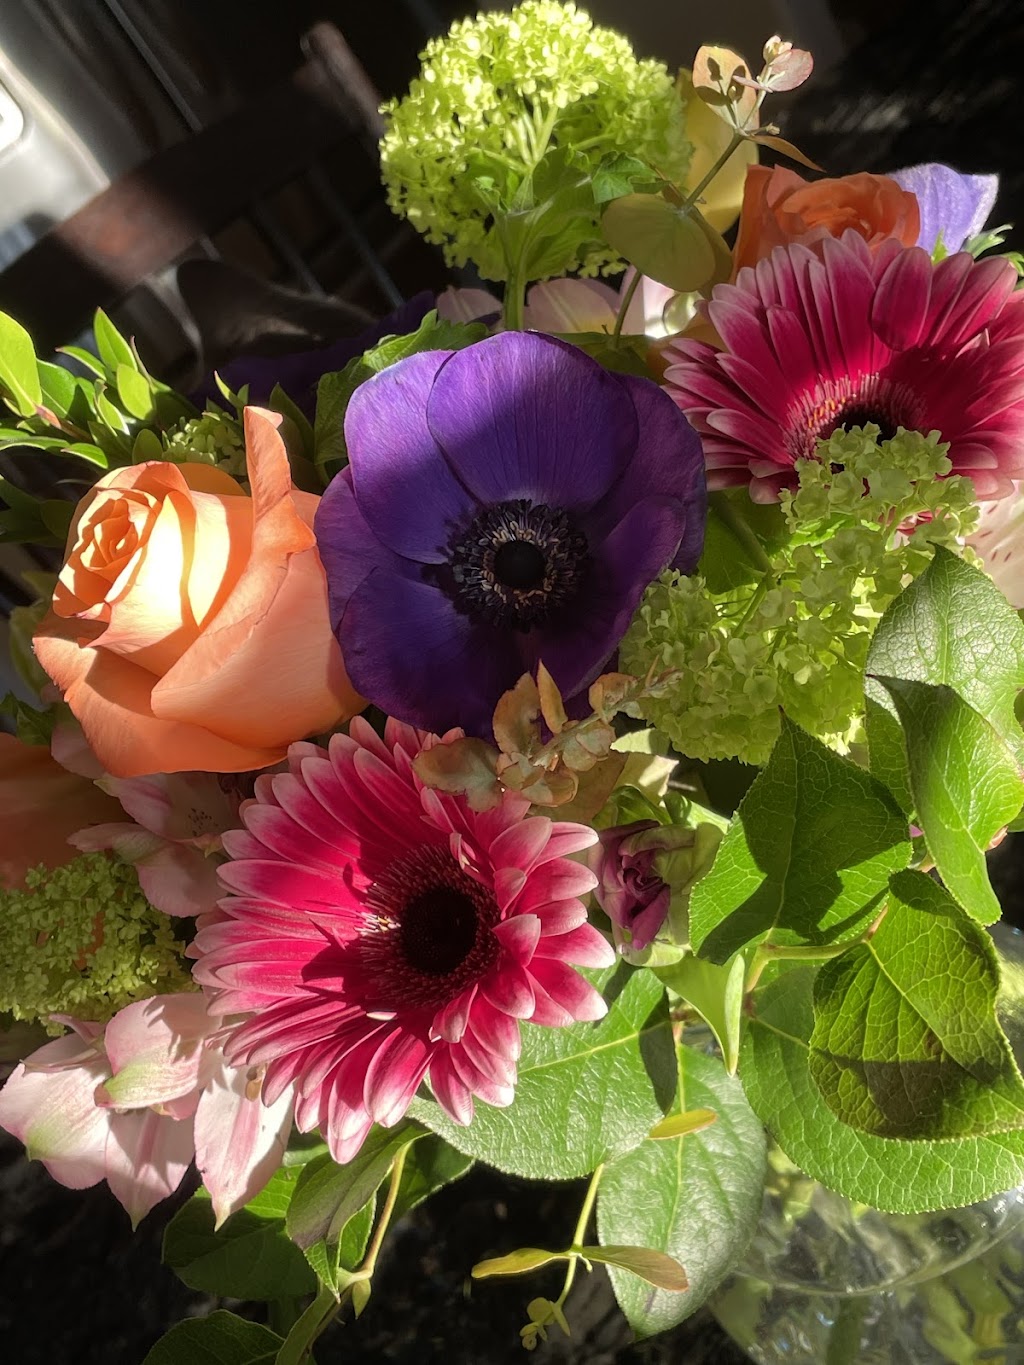 A Country Flower Shoppe and More | 420 NJ-34 Suite 305, Colts Neck, NJ 07722 | Phone: (732) 866-6669